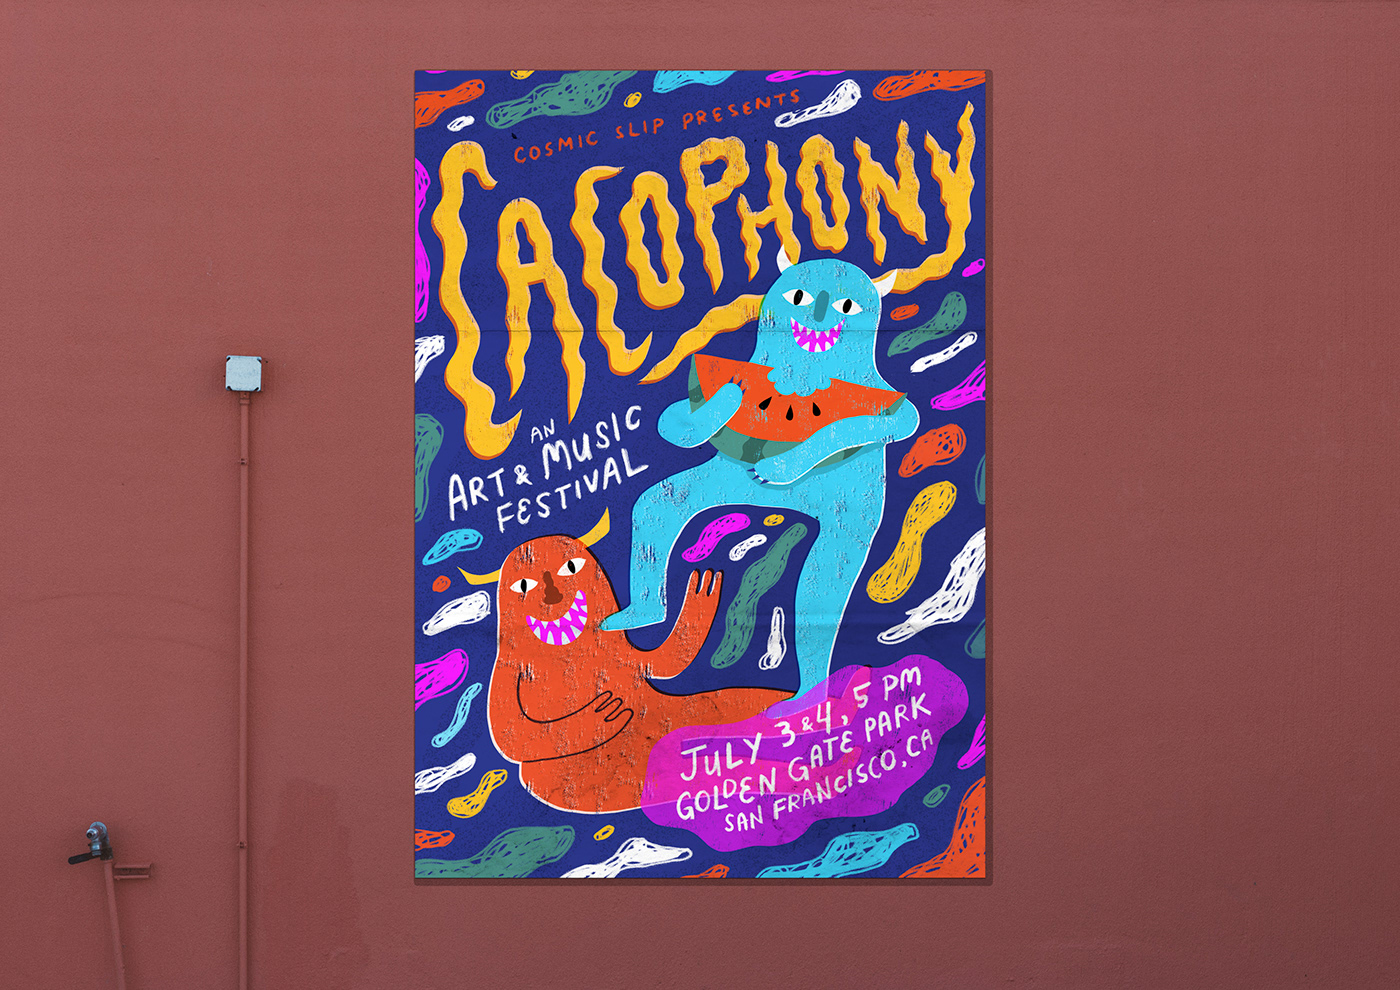 cacophony design festival Fun monsters music poster